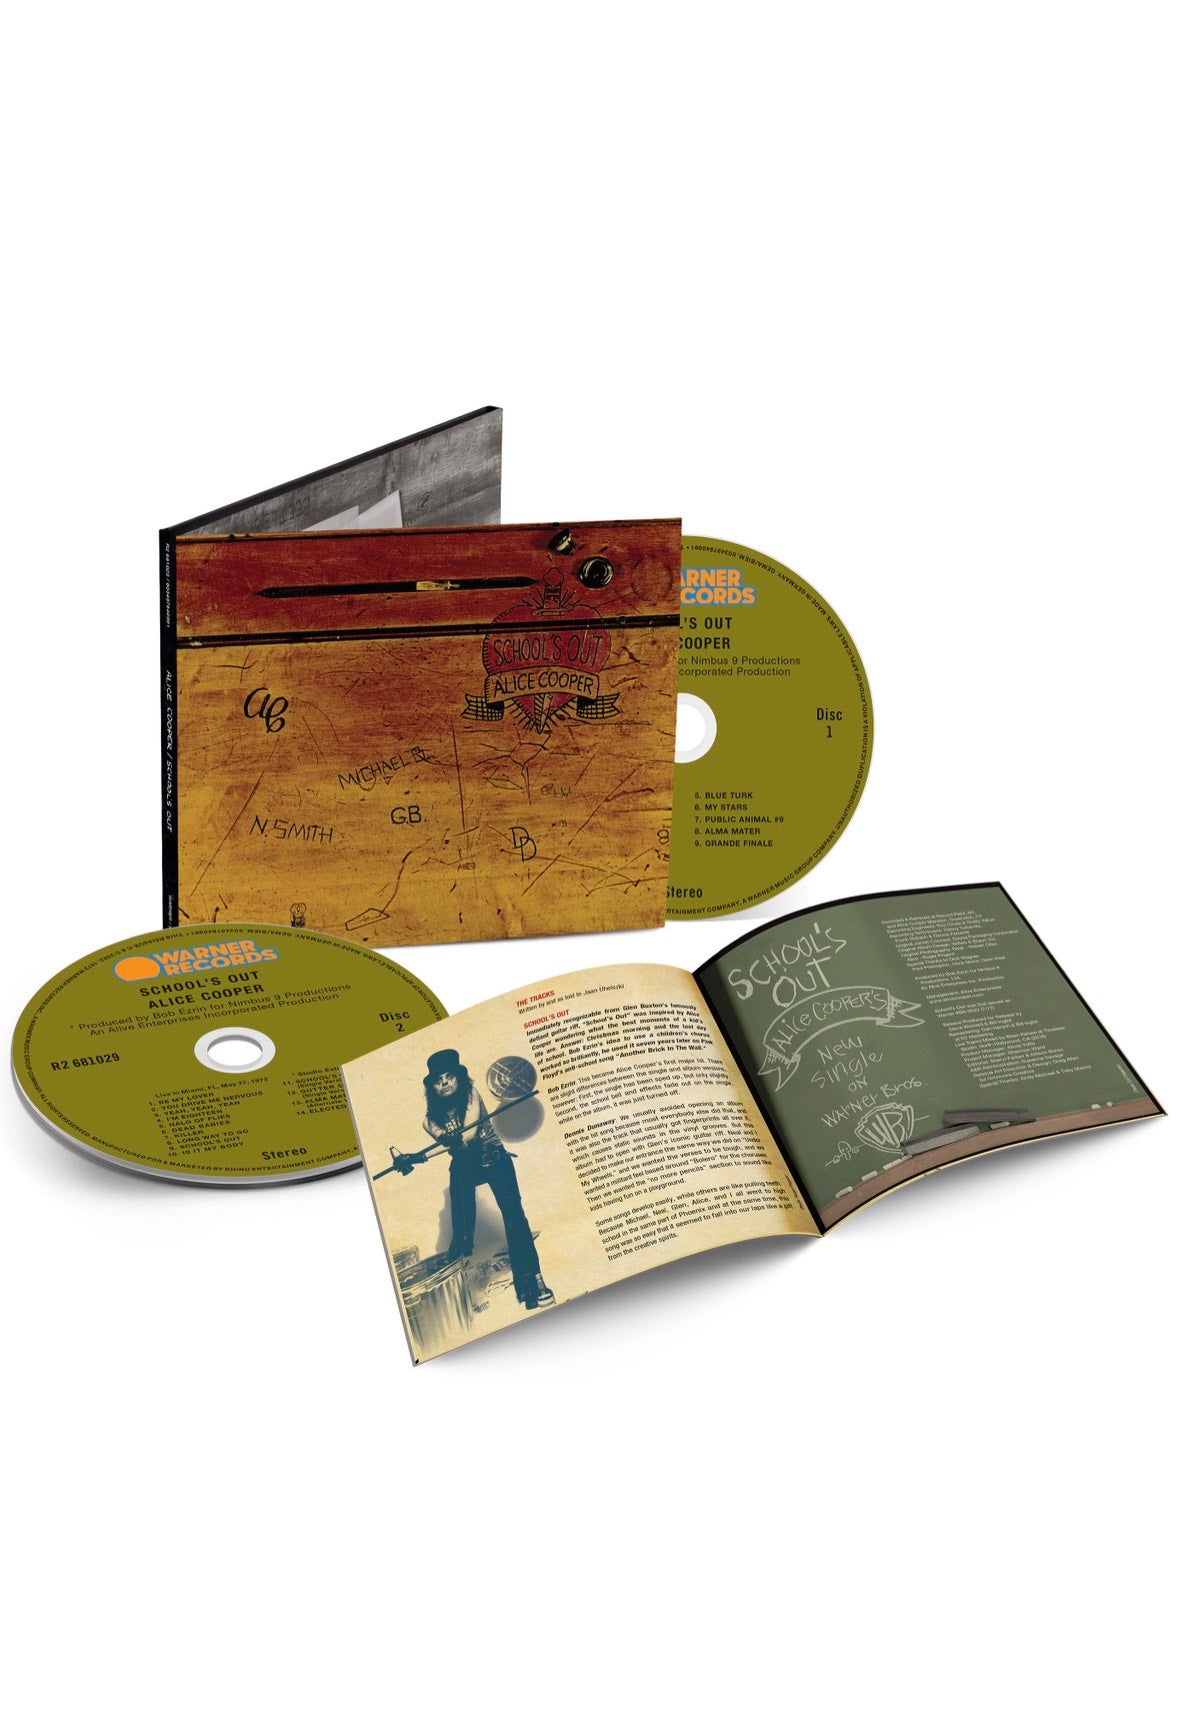 Alice Cooper - School's Out (Expanded & Remastered) - Digipak 2 CD